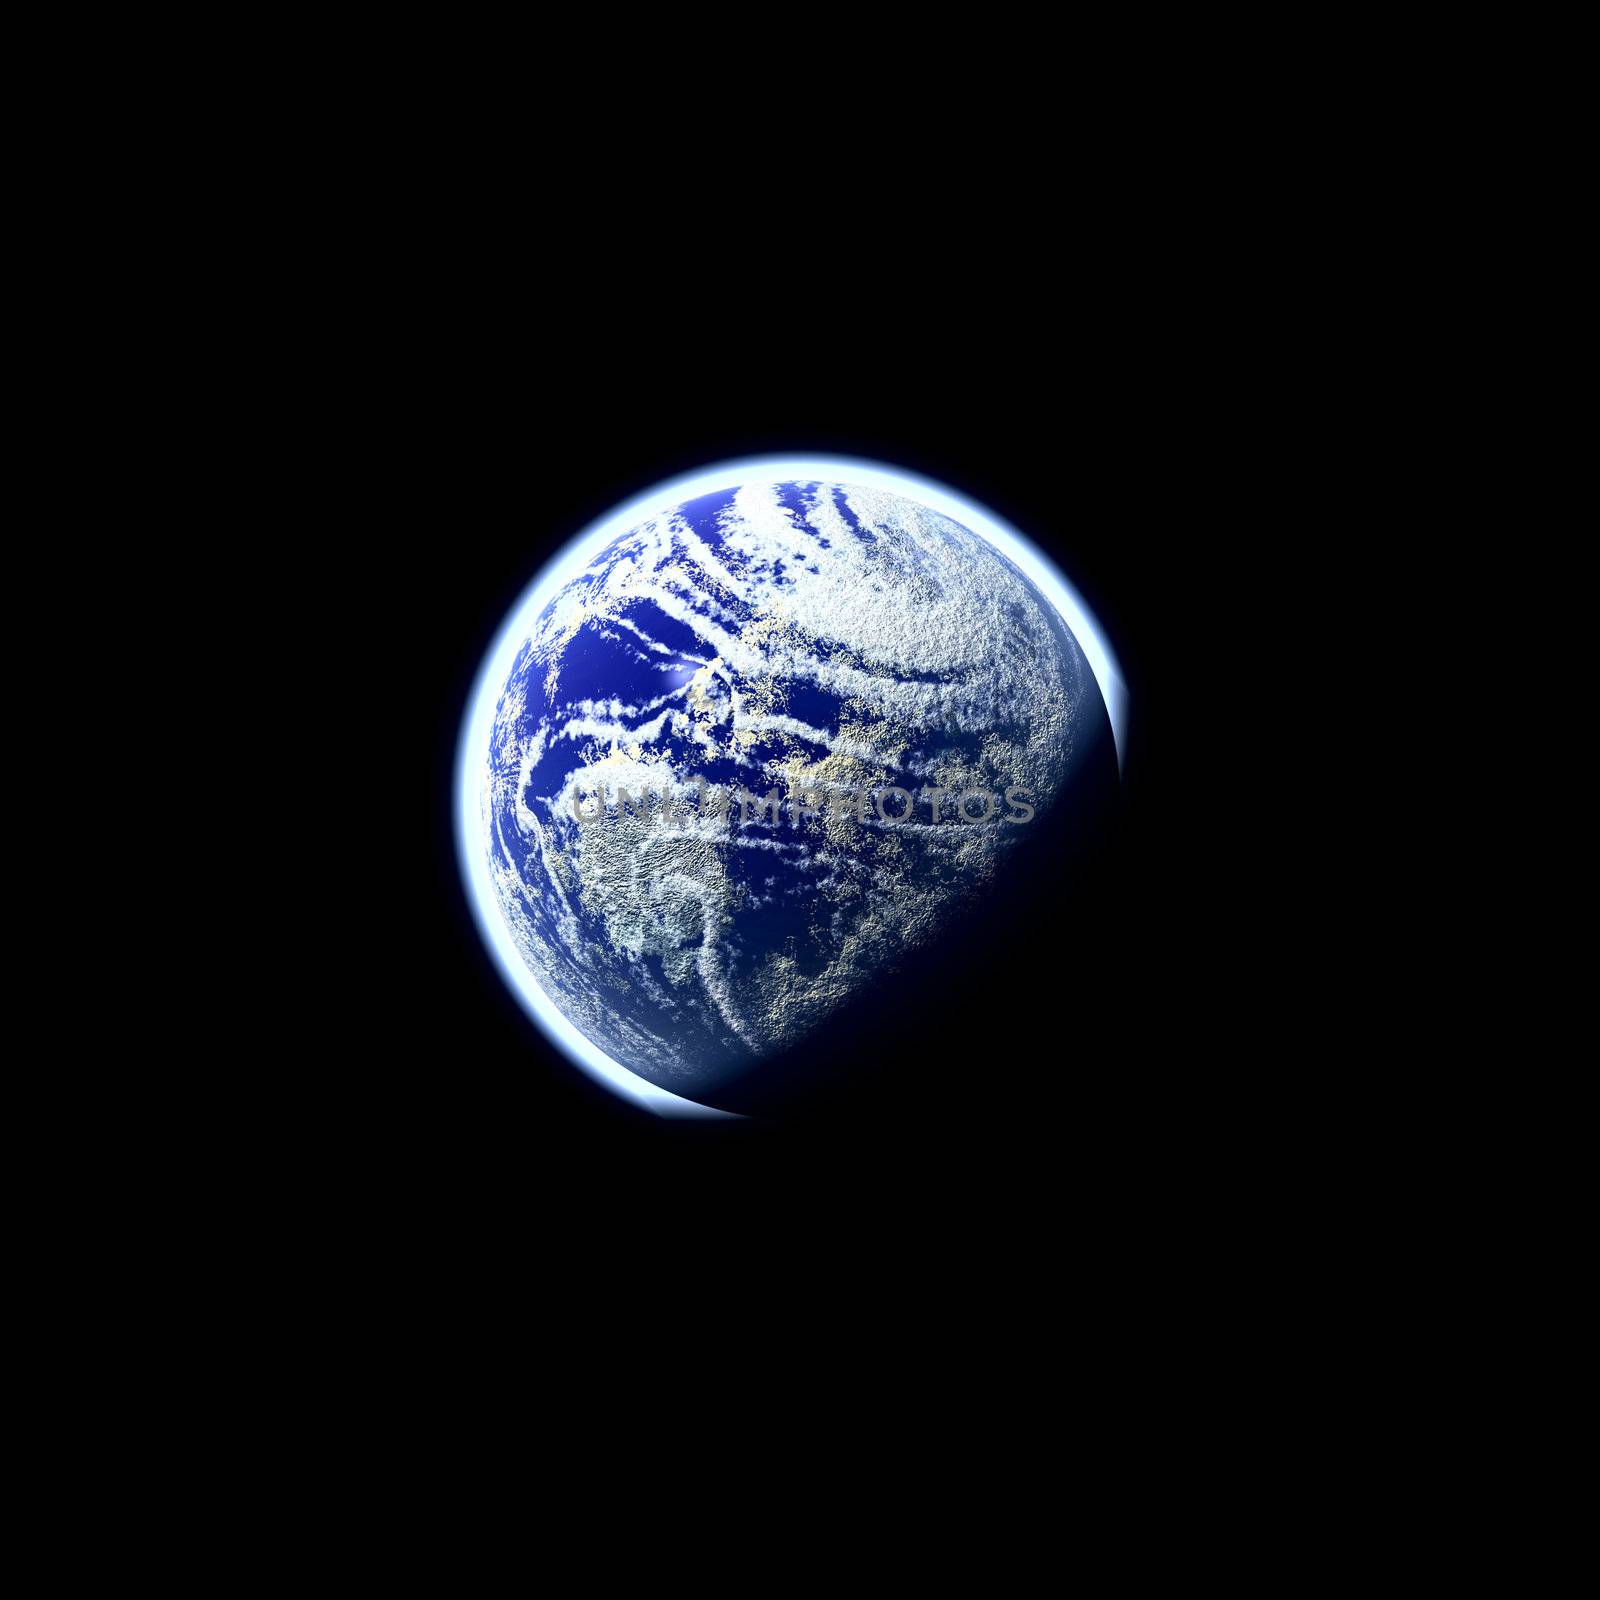 A glowing planet earth illustration over a black background.